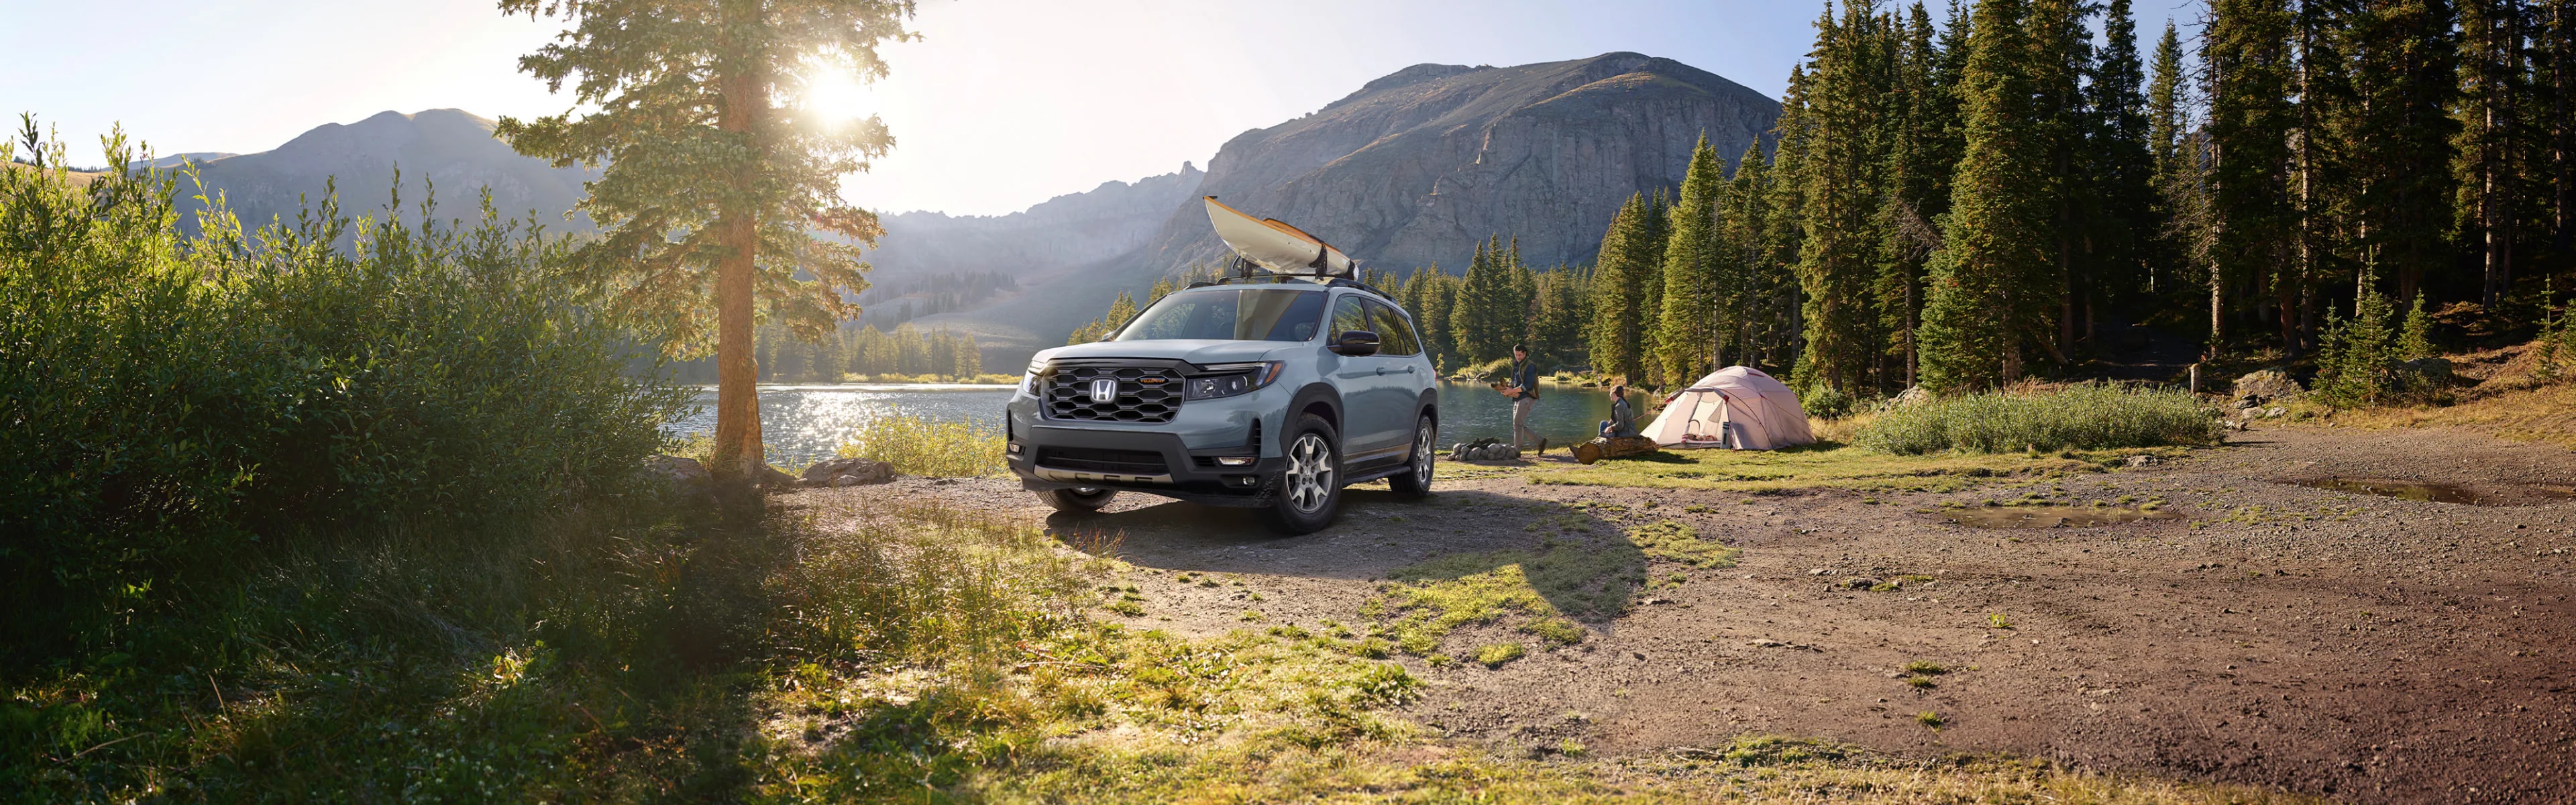 Pre-Order Your 2022 Honda Passport in Chatham, ON